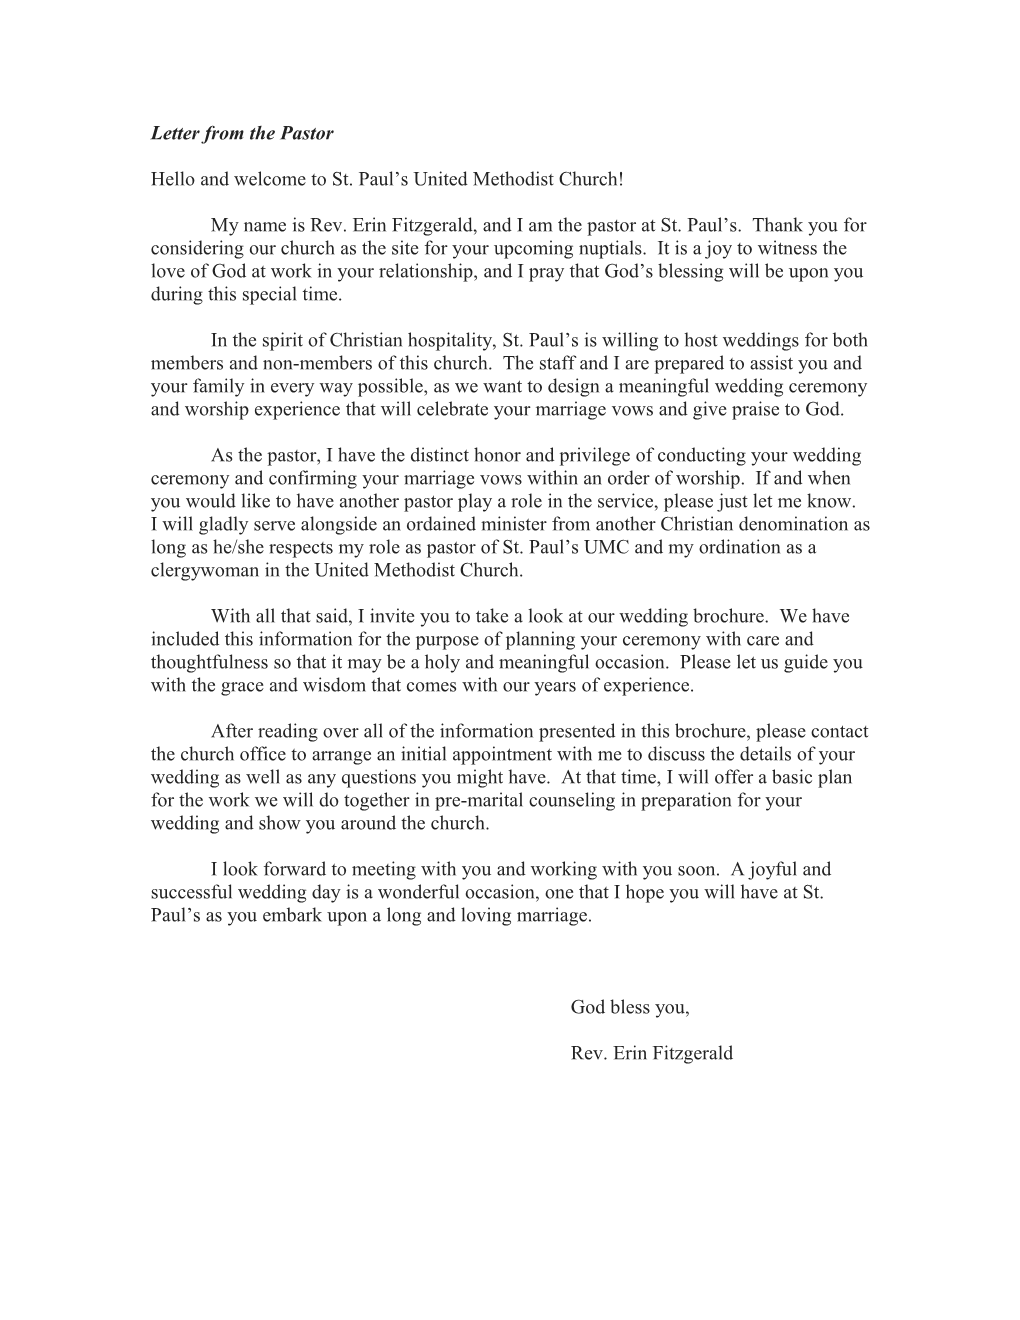 Letter from the Pastor